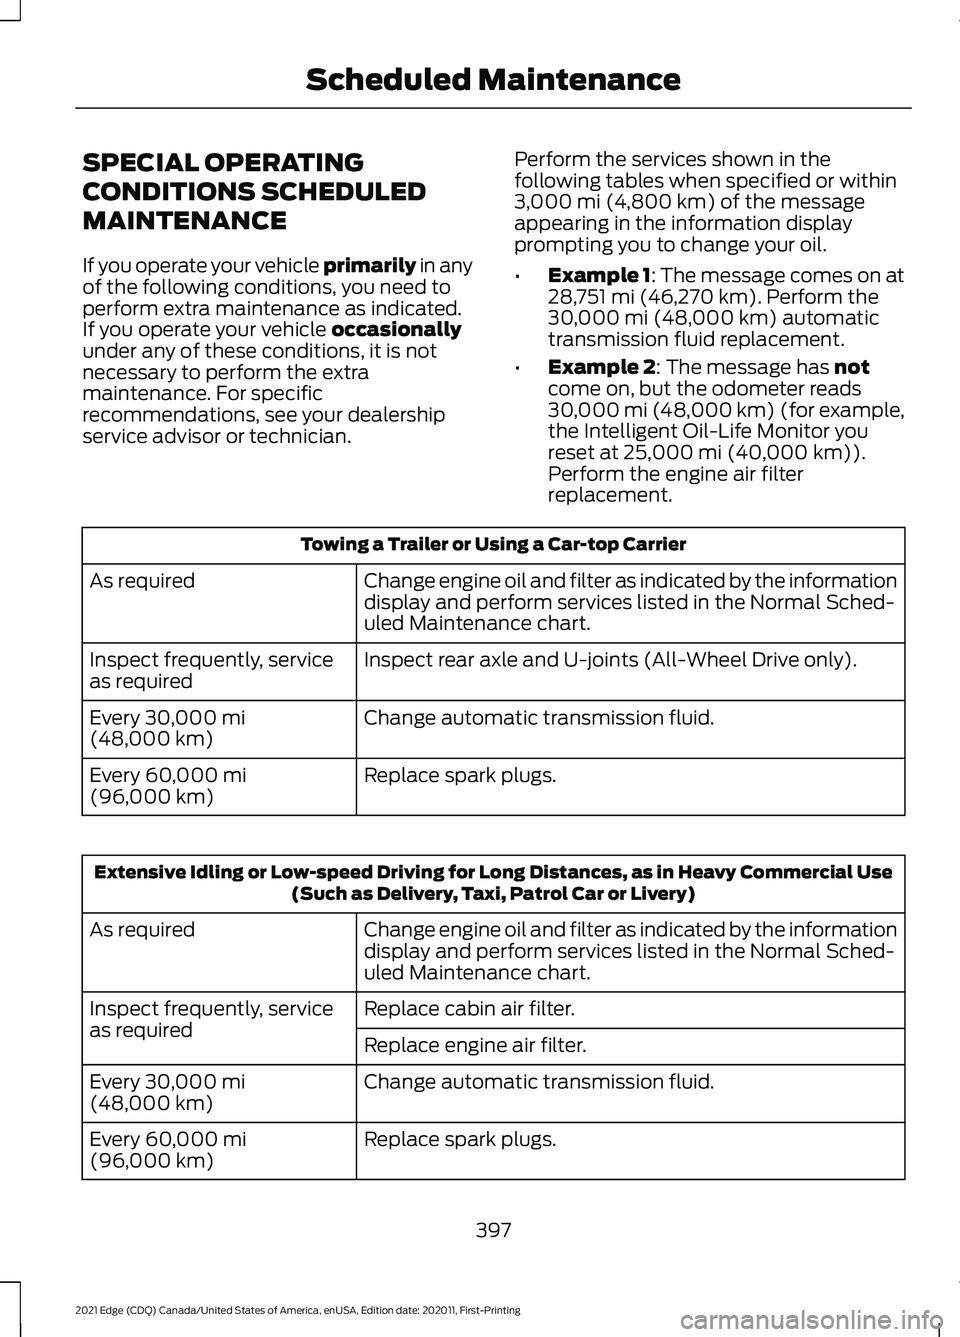 FORD EDGE 2021  Owners Manual SPECIAL OPERATING
CONDITIONS SCHEDULED
MAINTENANCE
If you operate your vehicle primarily in any
of the following conditions, you need to
perform extra maintenance as indicated.
If you operate your veh